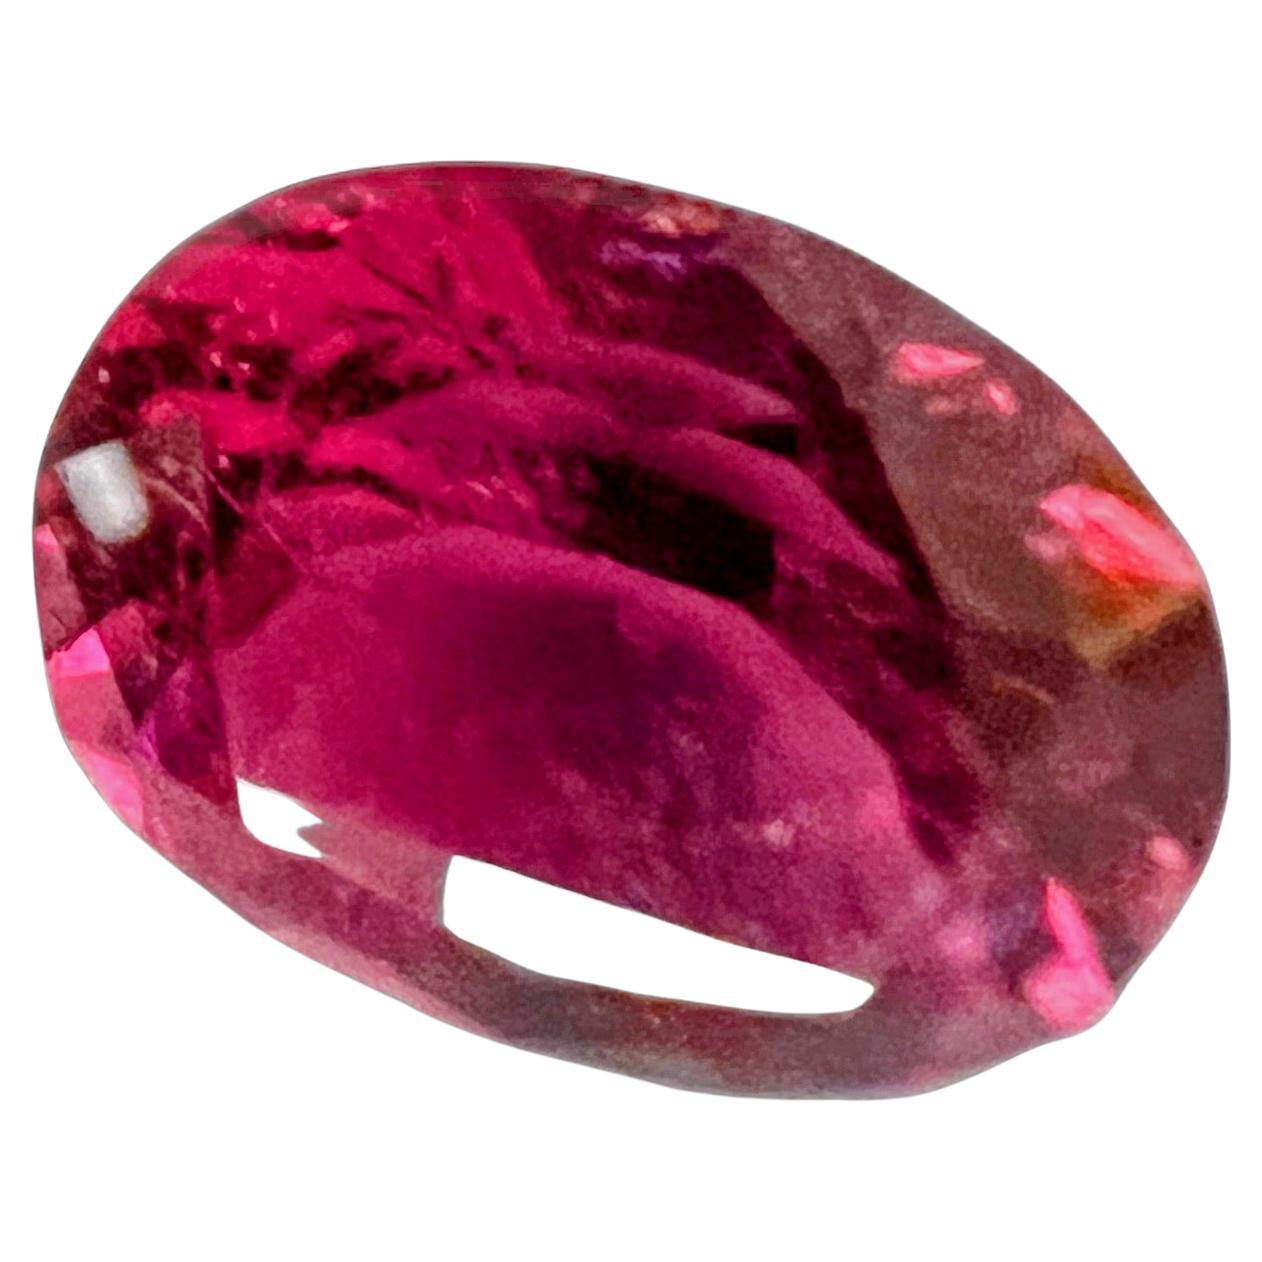 A Radiant Pink Dream in this rare 9.60ct Oval Pink Rubellite Tourmaline. Mother Nature herself has painted this tourmaline with the most dramatic shades of pink, from soft pastels to deep rosy tones, it's a masterpiece of pinkish hues that embodies